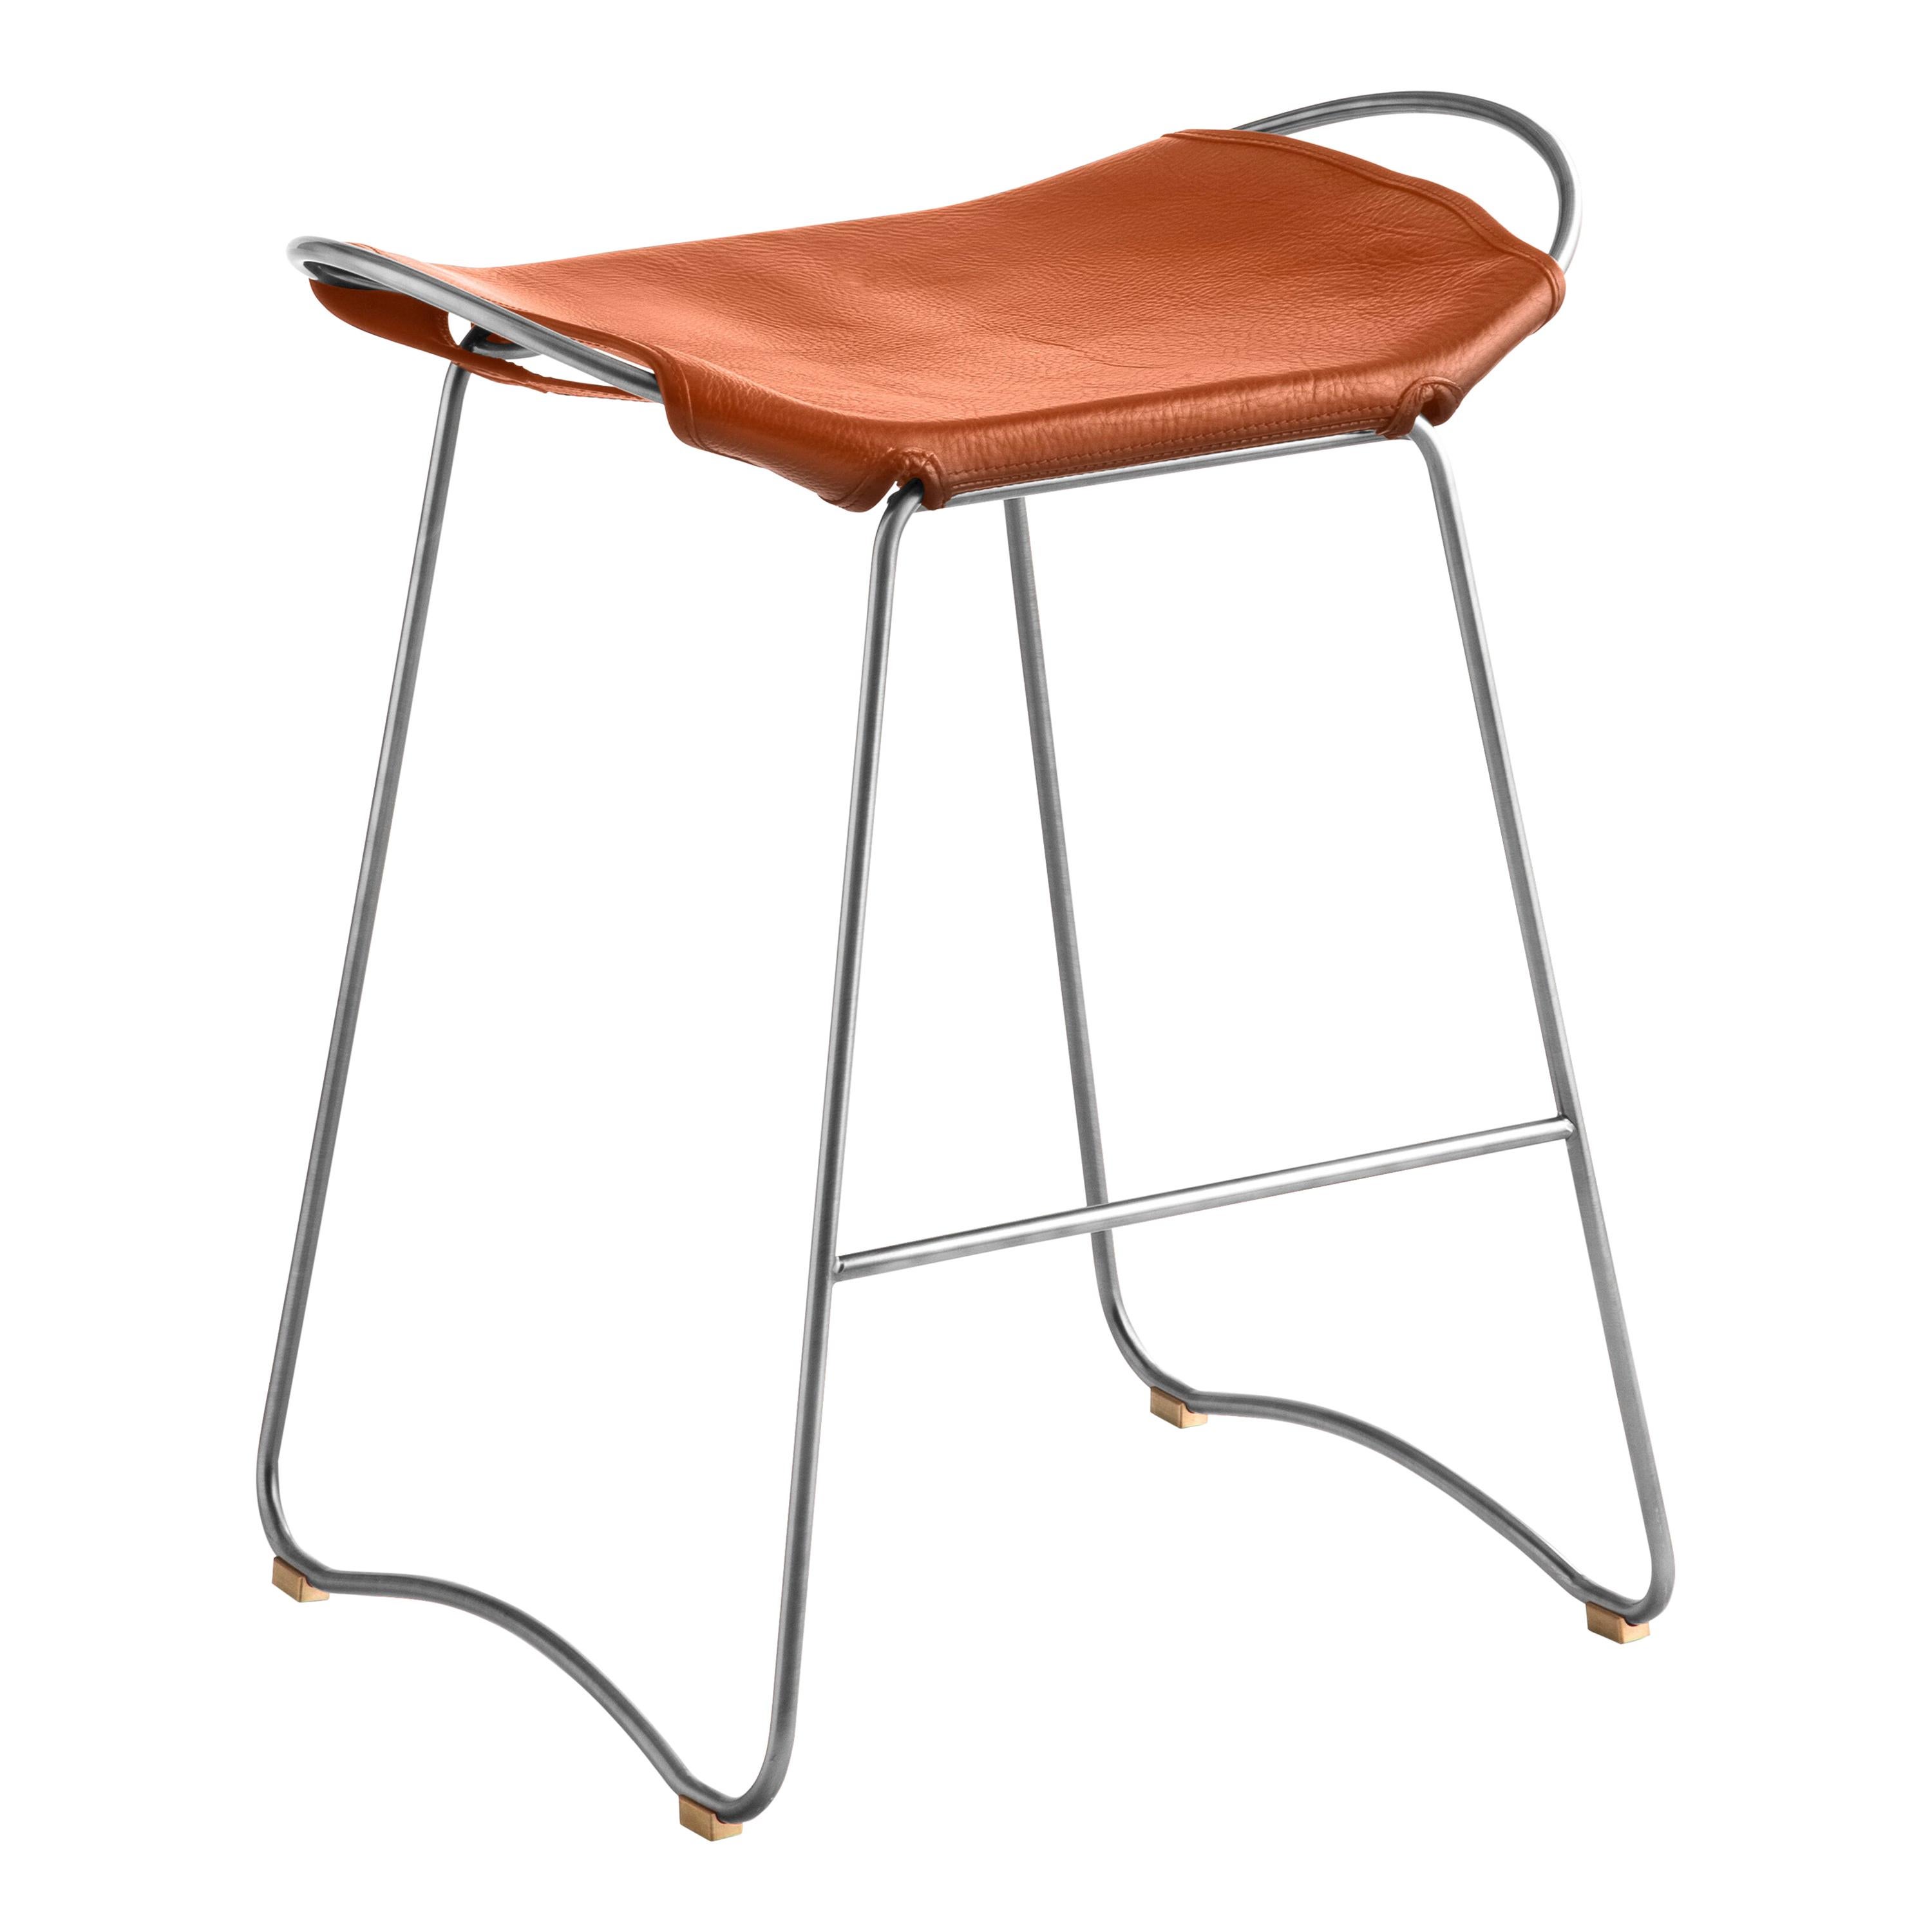 Bar Stool, Old Silver Steel and Natural Tobacco Leather, Contemporary Style